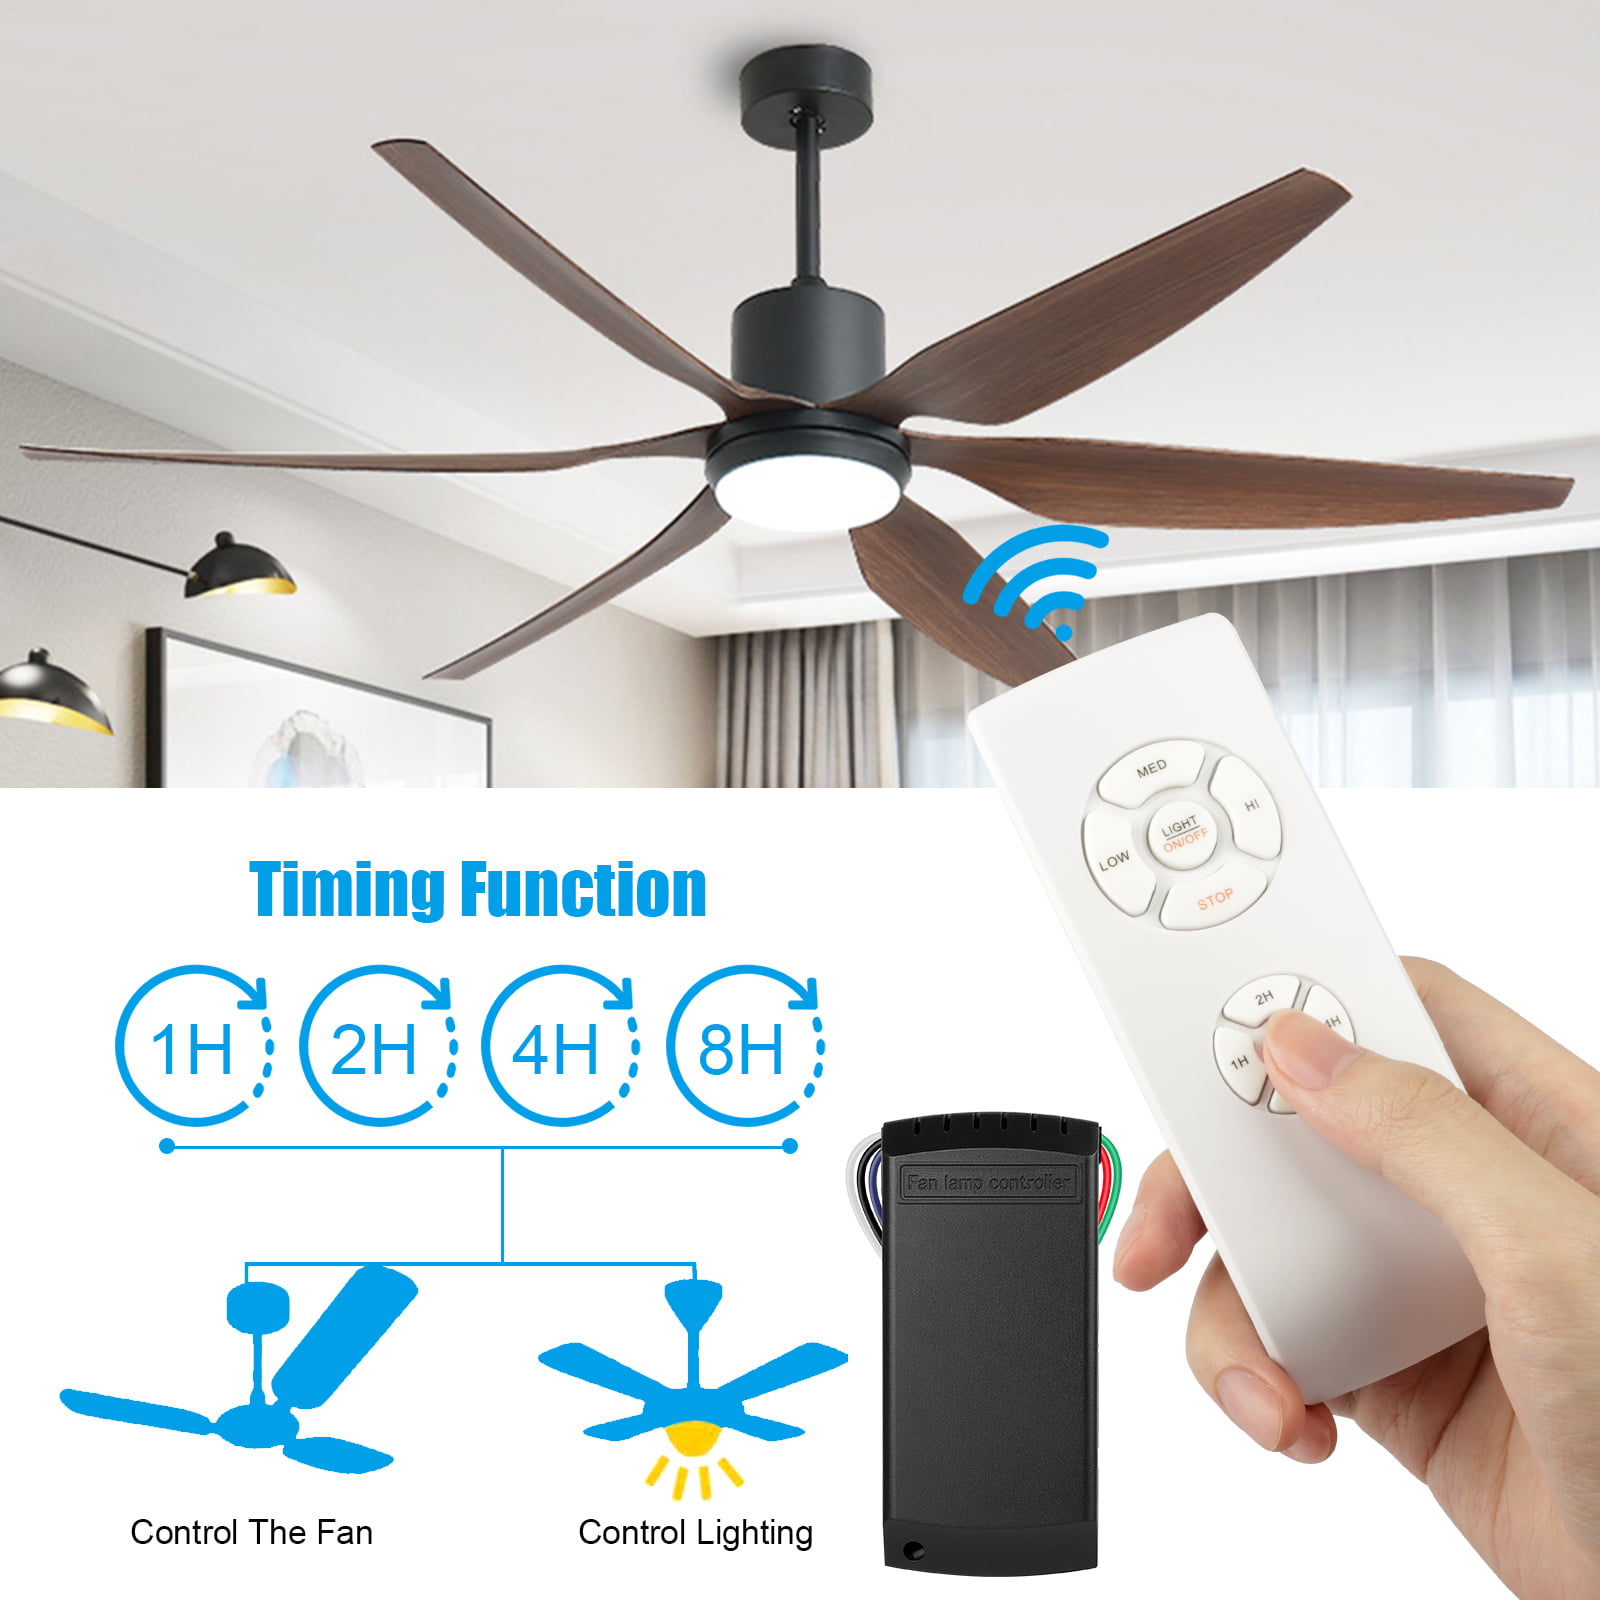 Universal Ceiling Fan Lamp Remote Controller Kit Eeekit Timing Wireless For Home Restaurant Office Hotel The Club Display Hall Garage Com - How To Control Ceiling Fan With Remote